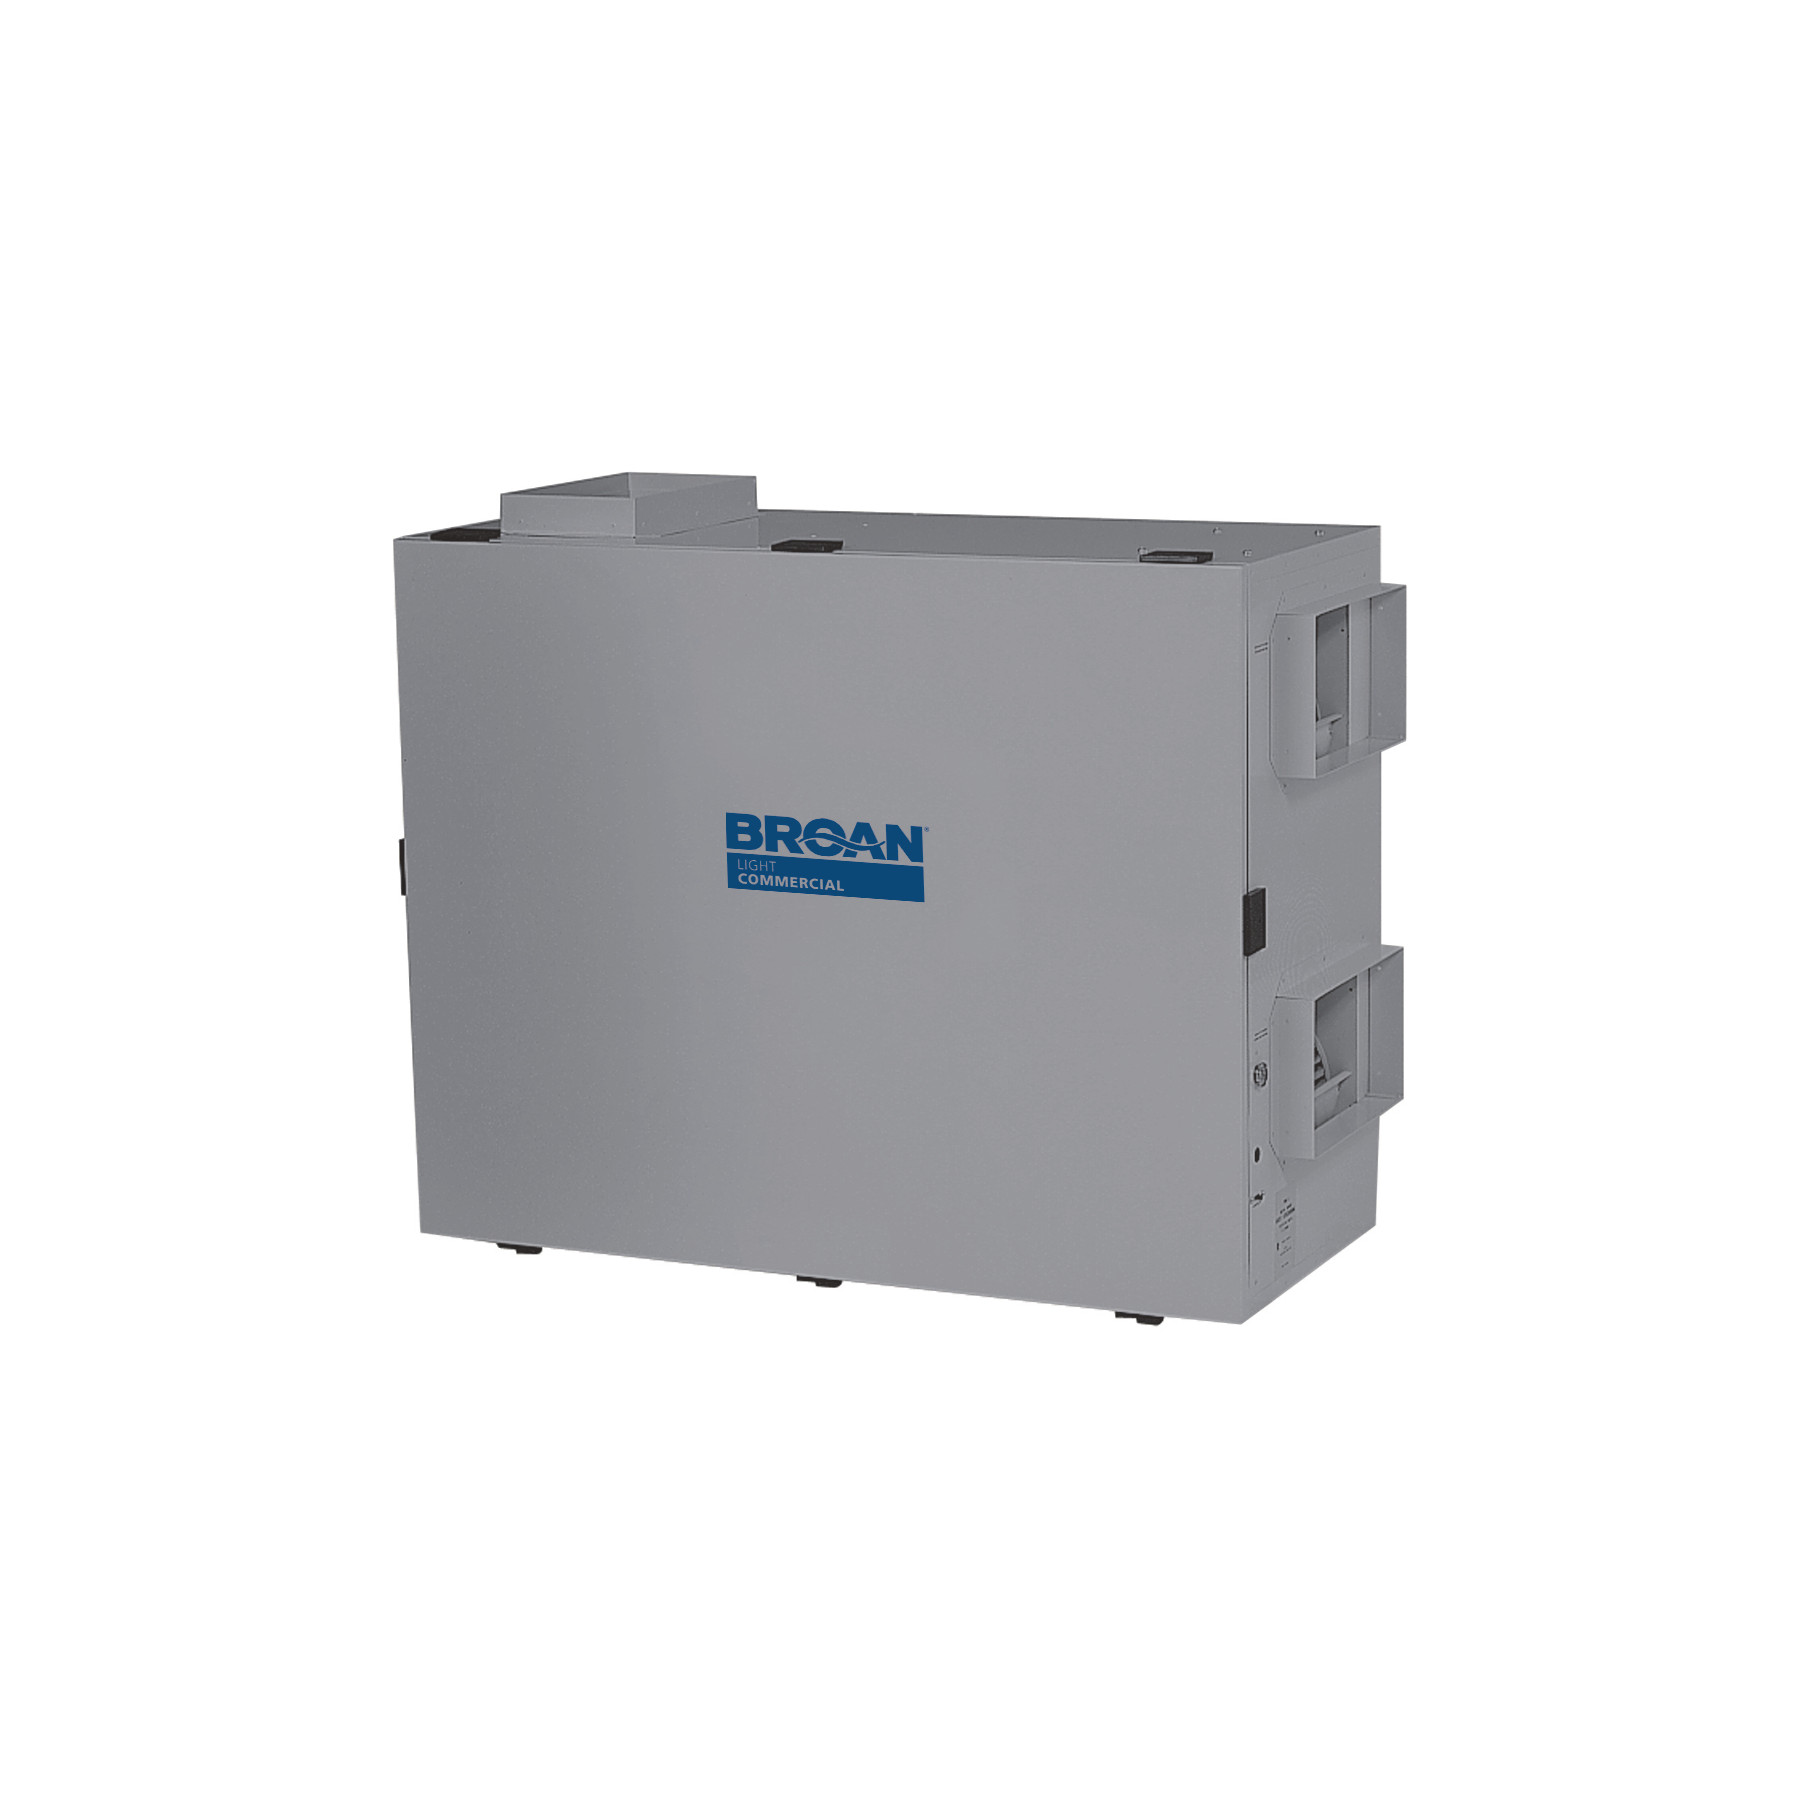 **DISCONTINUED** Broan® Light Commercial unit for pool and other extremely humid locations